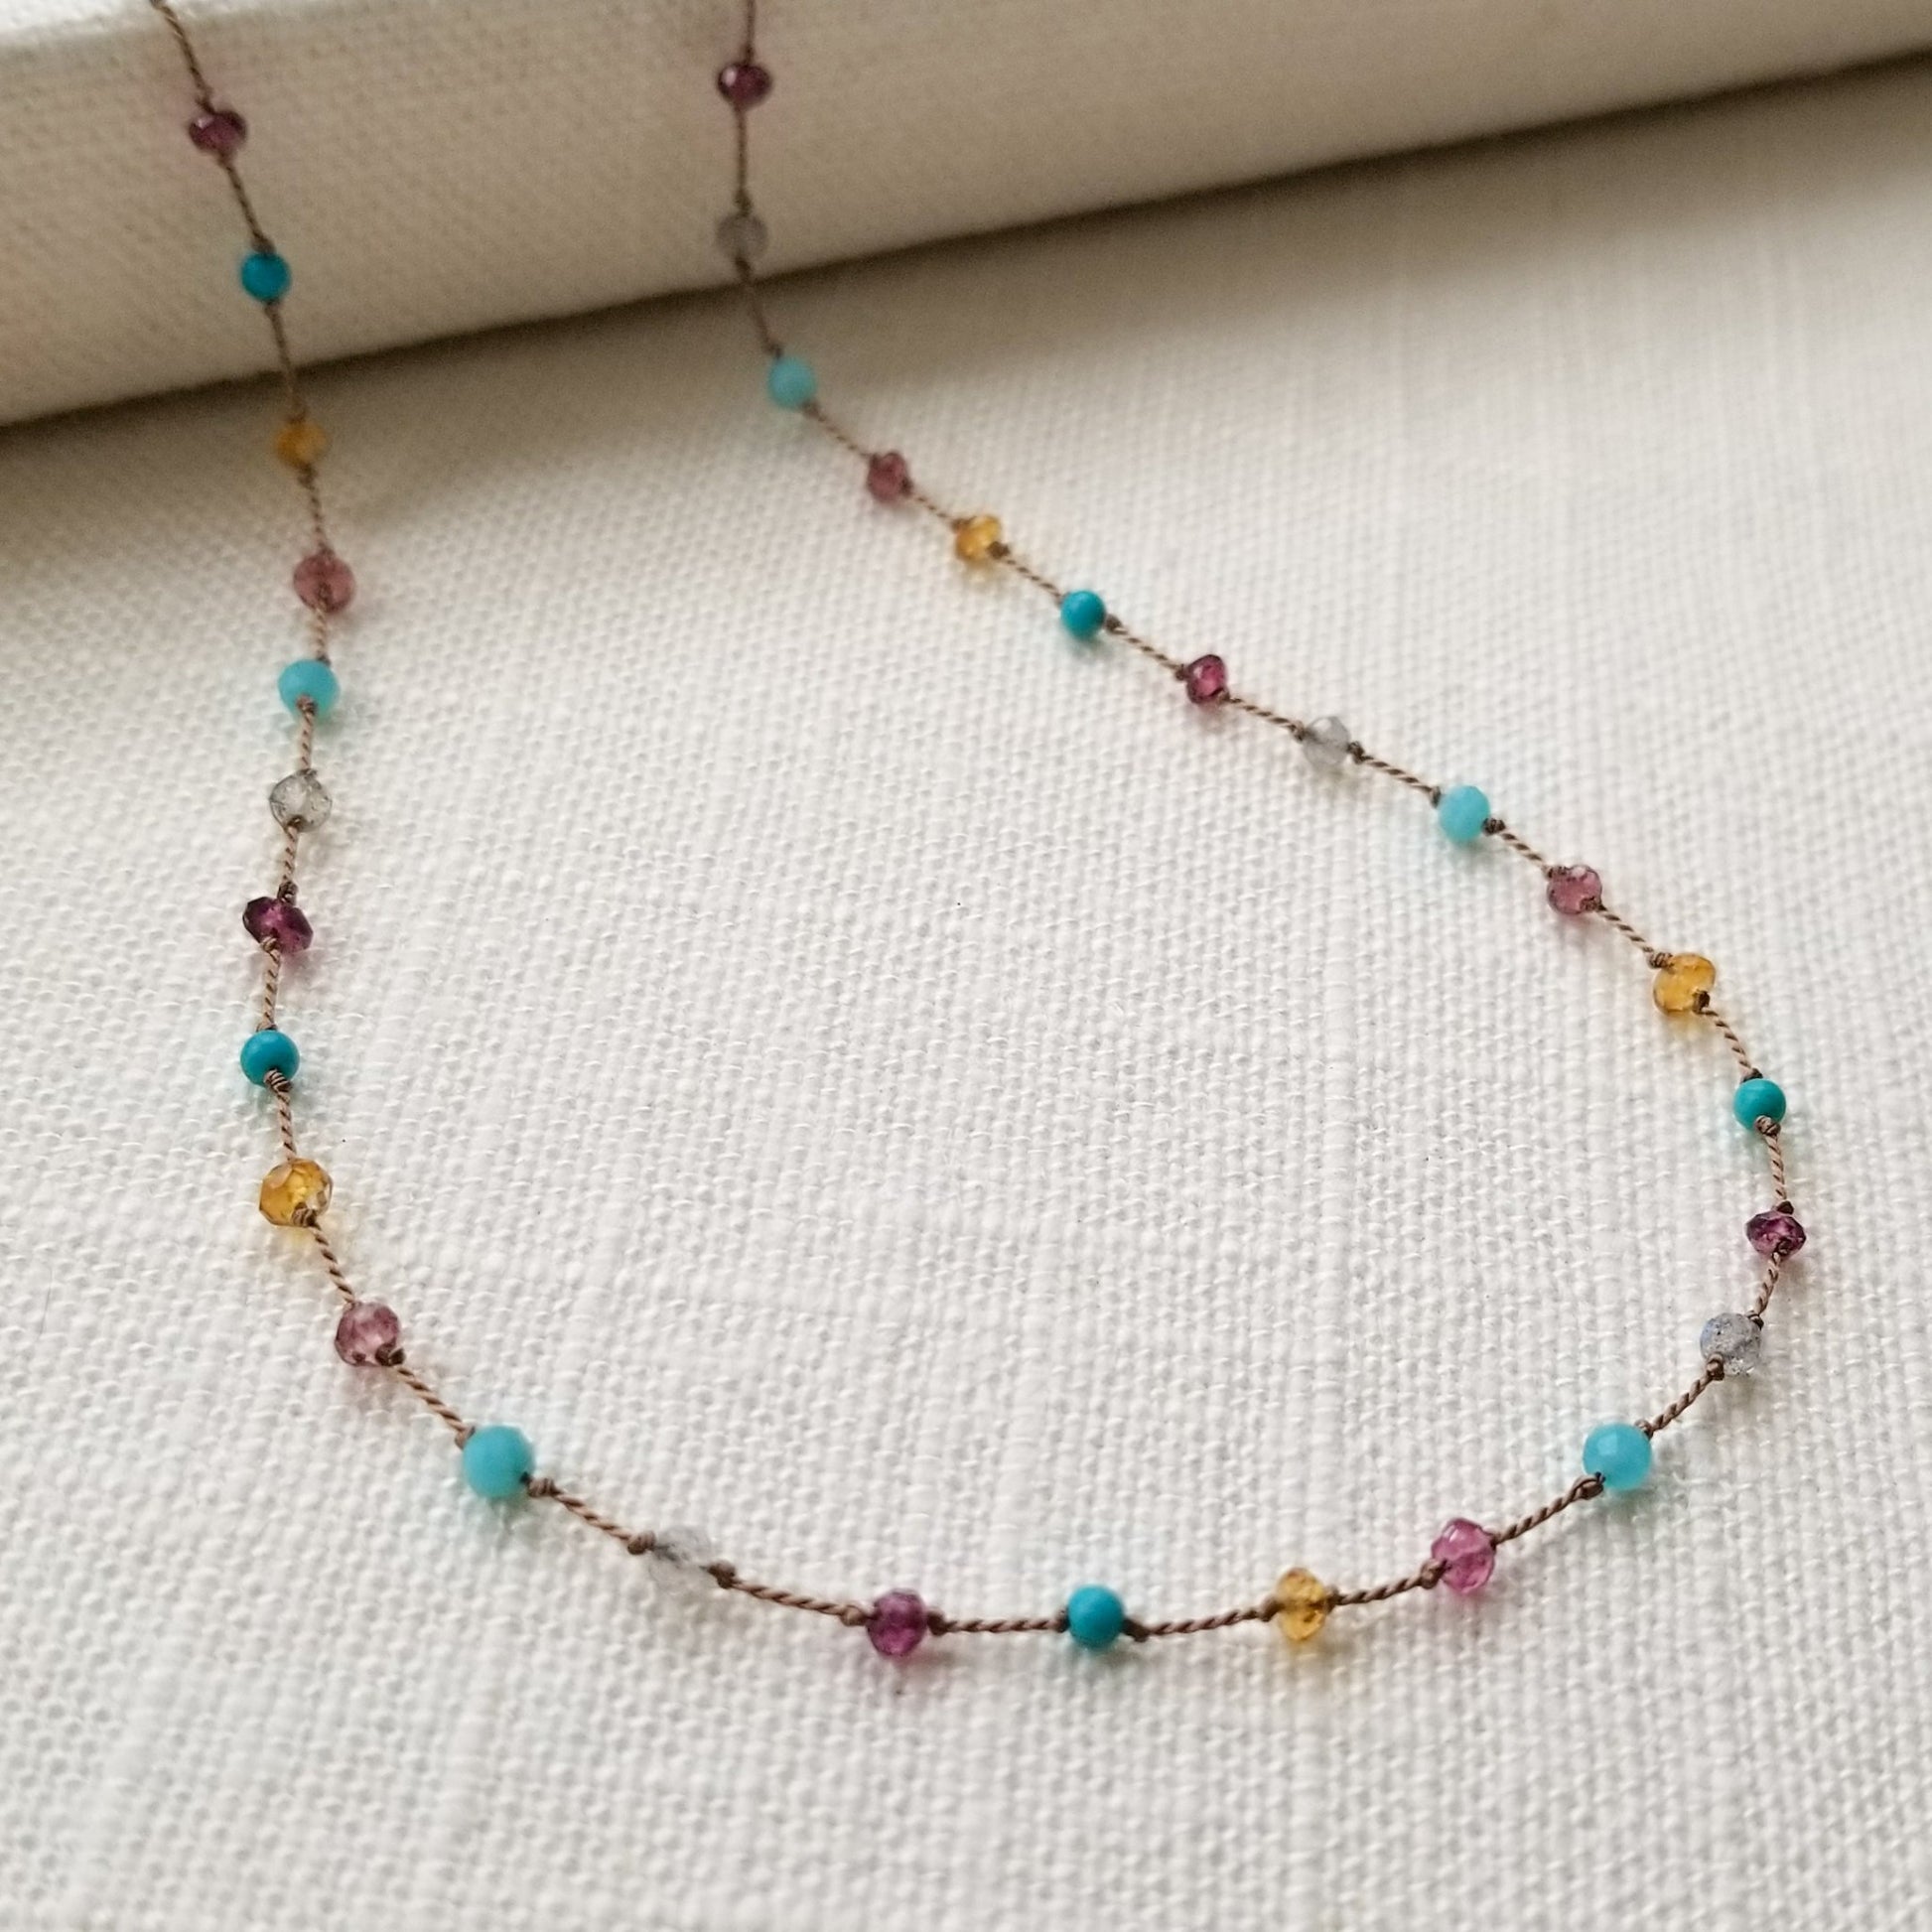 Necklace featuring citrine, labradorite, amazonite, turquoise, pink tourmaline, and garnets evenly spaced, knotted on beige silk cord, is displayed on a white fabric background.